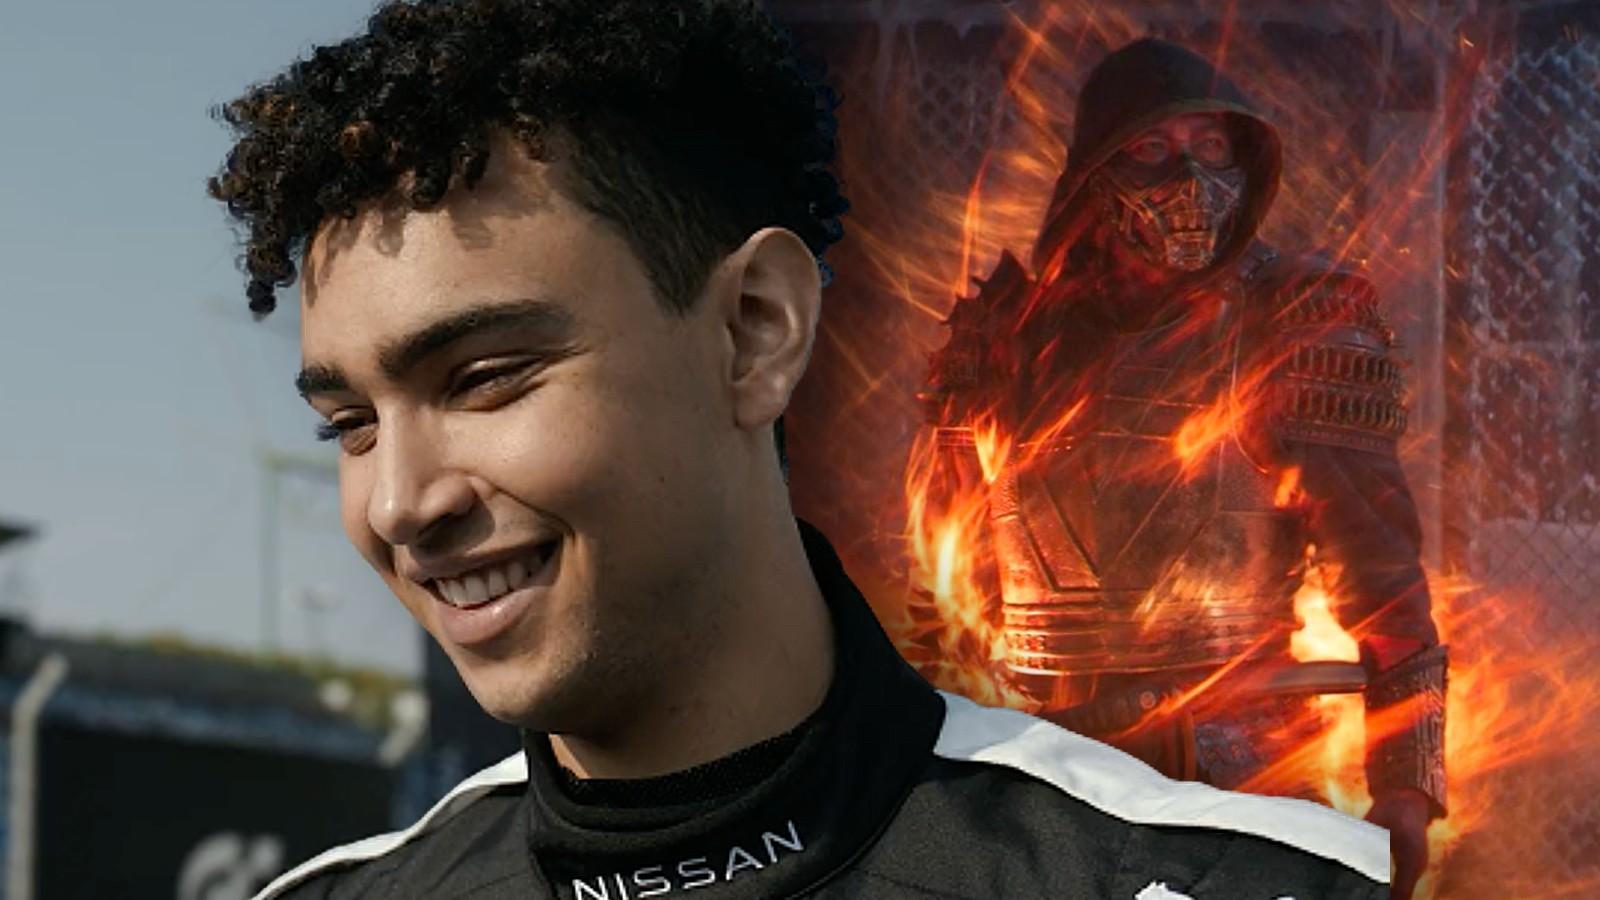 Archie Madekwe in Gran Turismo and Scorpion in the Mortal Kombat video game movies